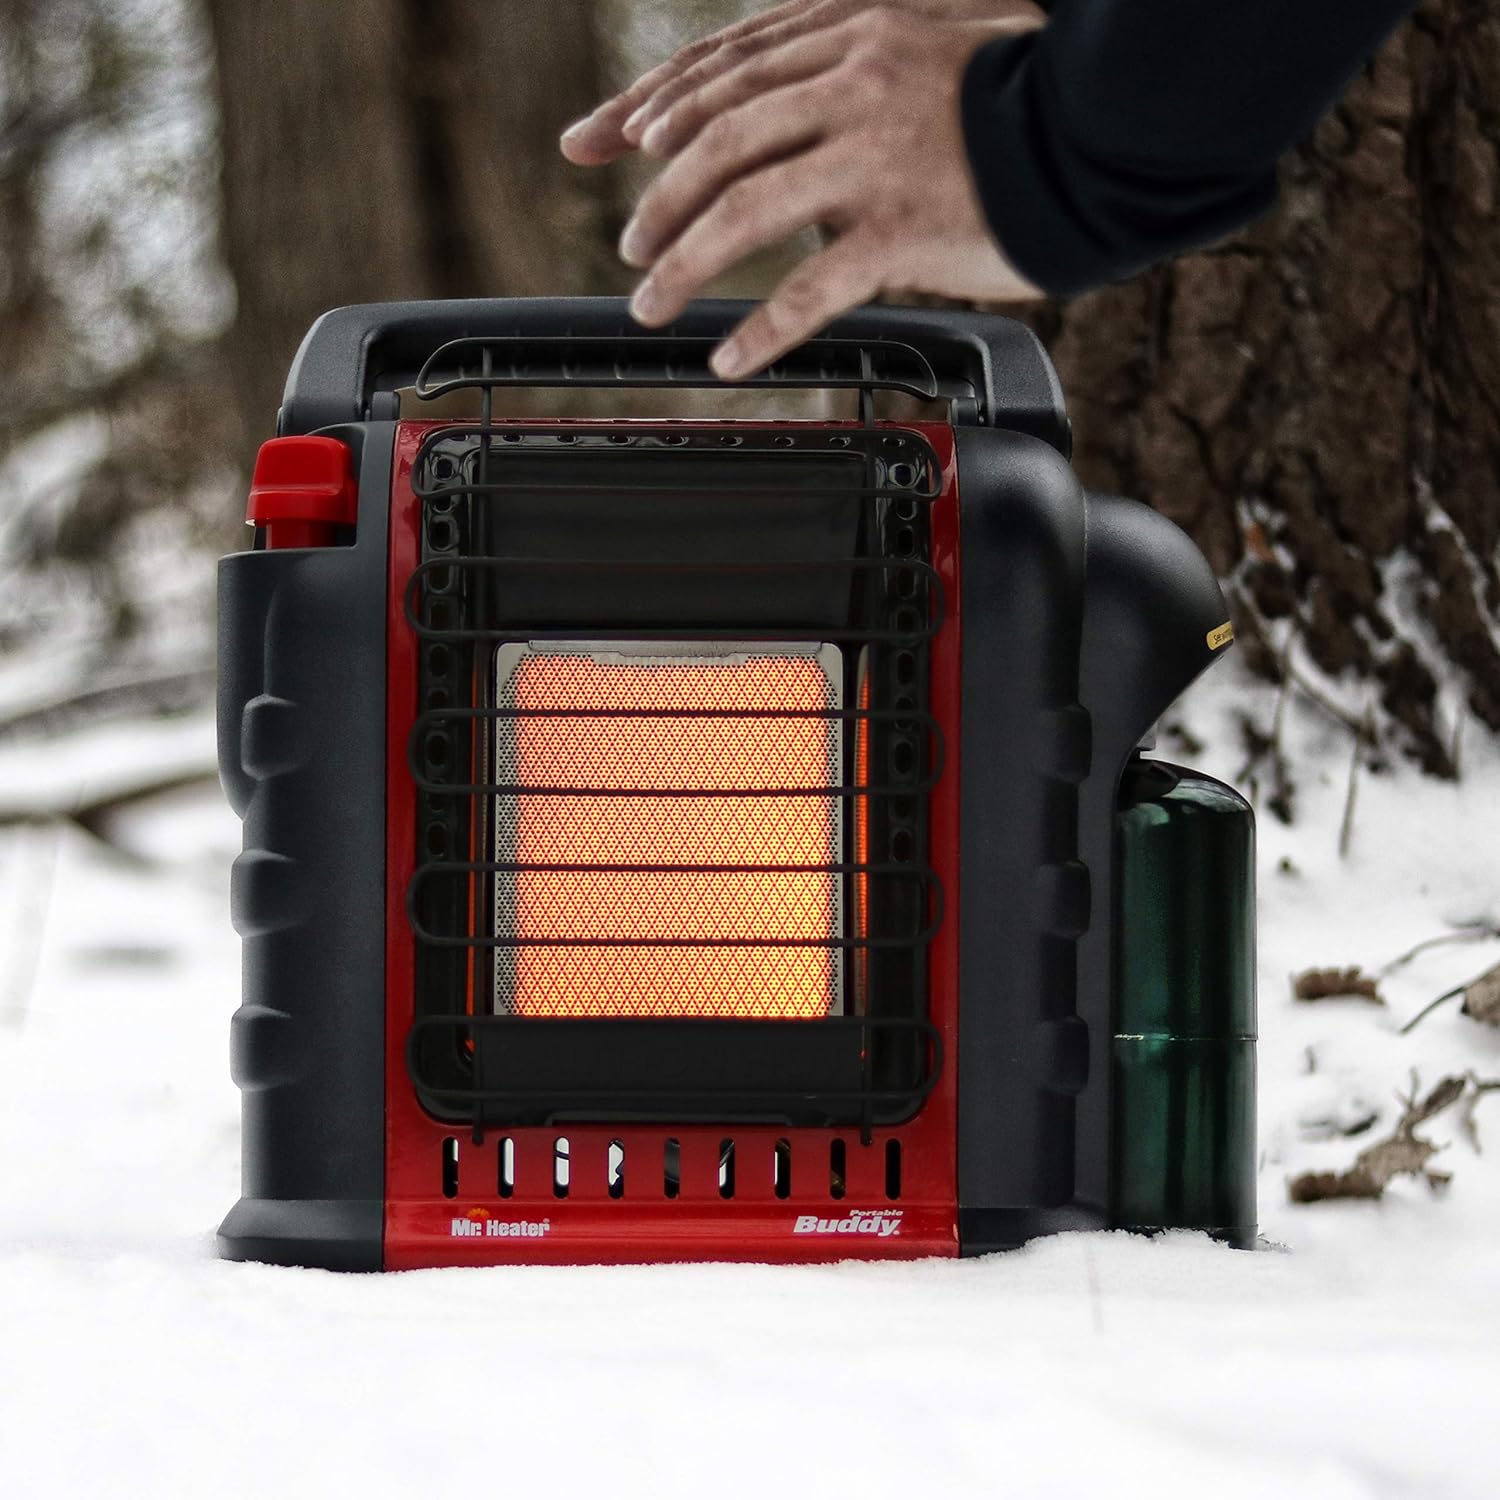 Mr. Heater MH9BX-Massachusetts/Canada approved portable Propane Heater - Mr. Heater MH9BX-Massachusetts/Canada Approved Portable Propane Heater Review